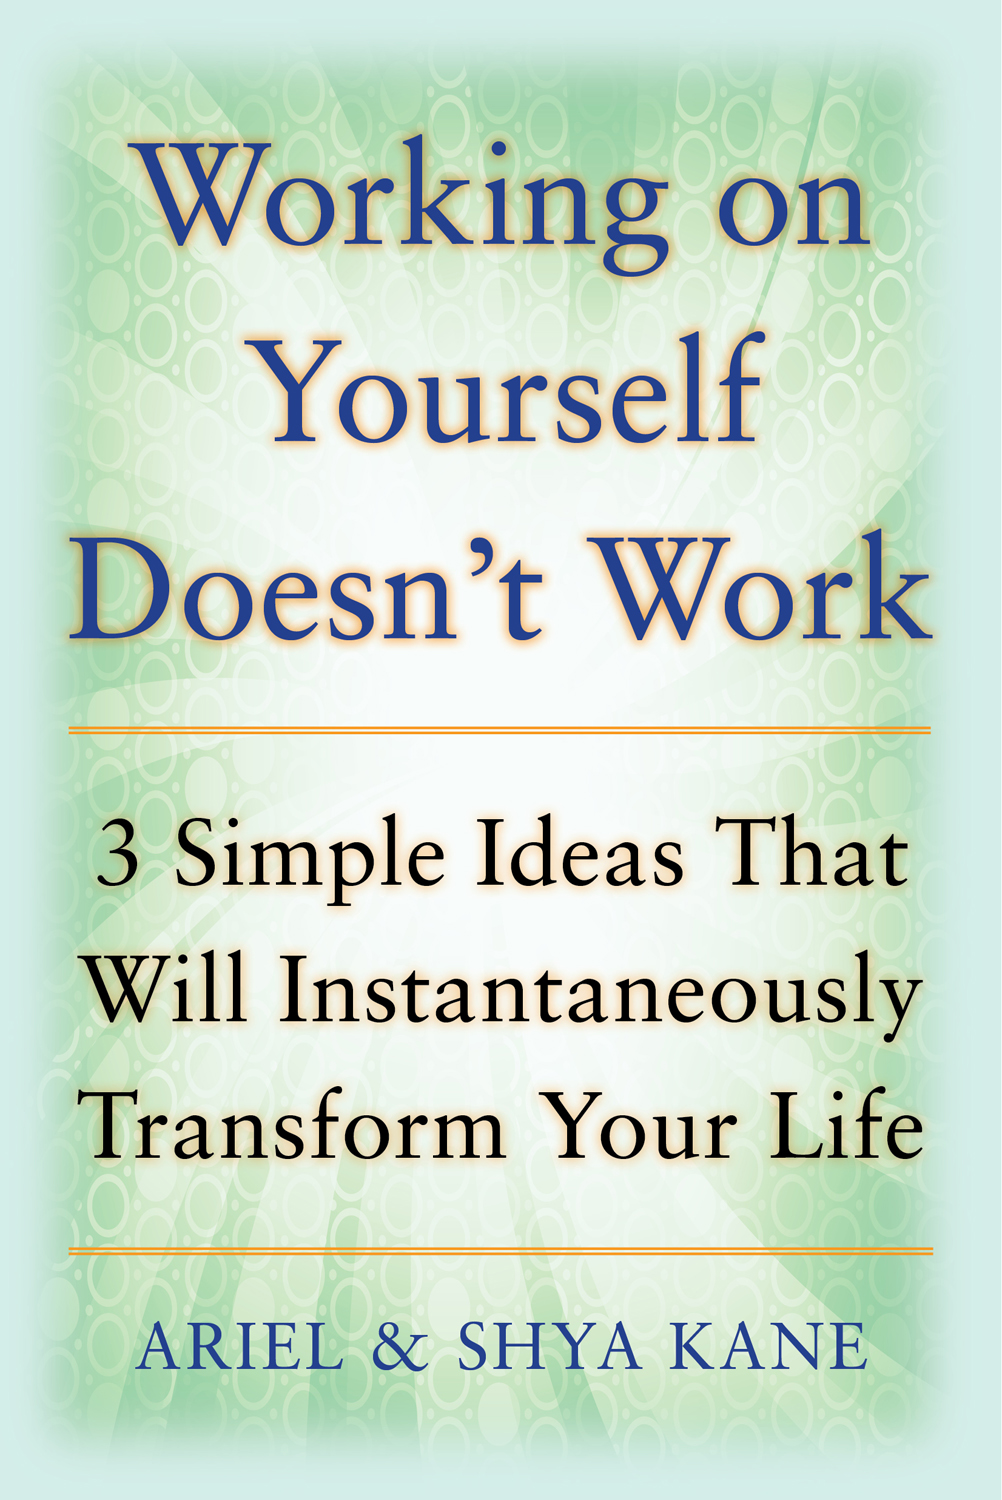 Spalding Moon: An excerpt from Working On Yourself Doesn’t Work: The 3 Simple Ideas that will Instantaneously Transform Your Life